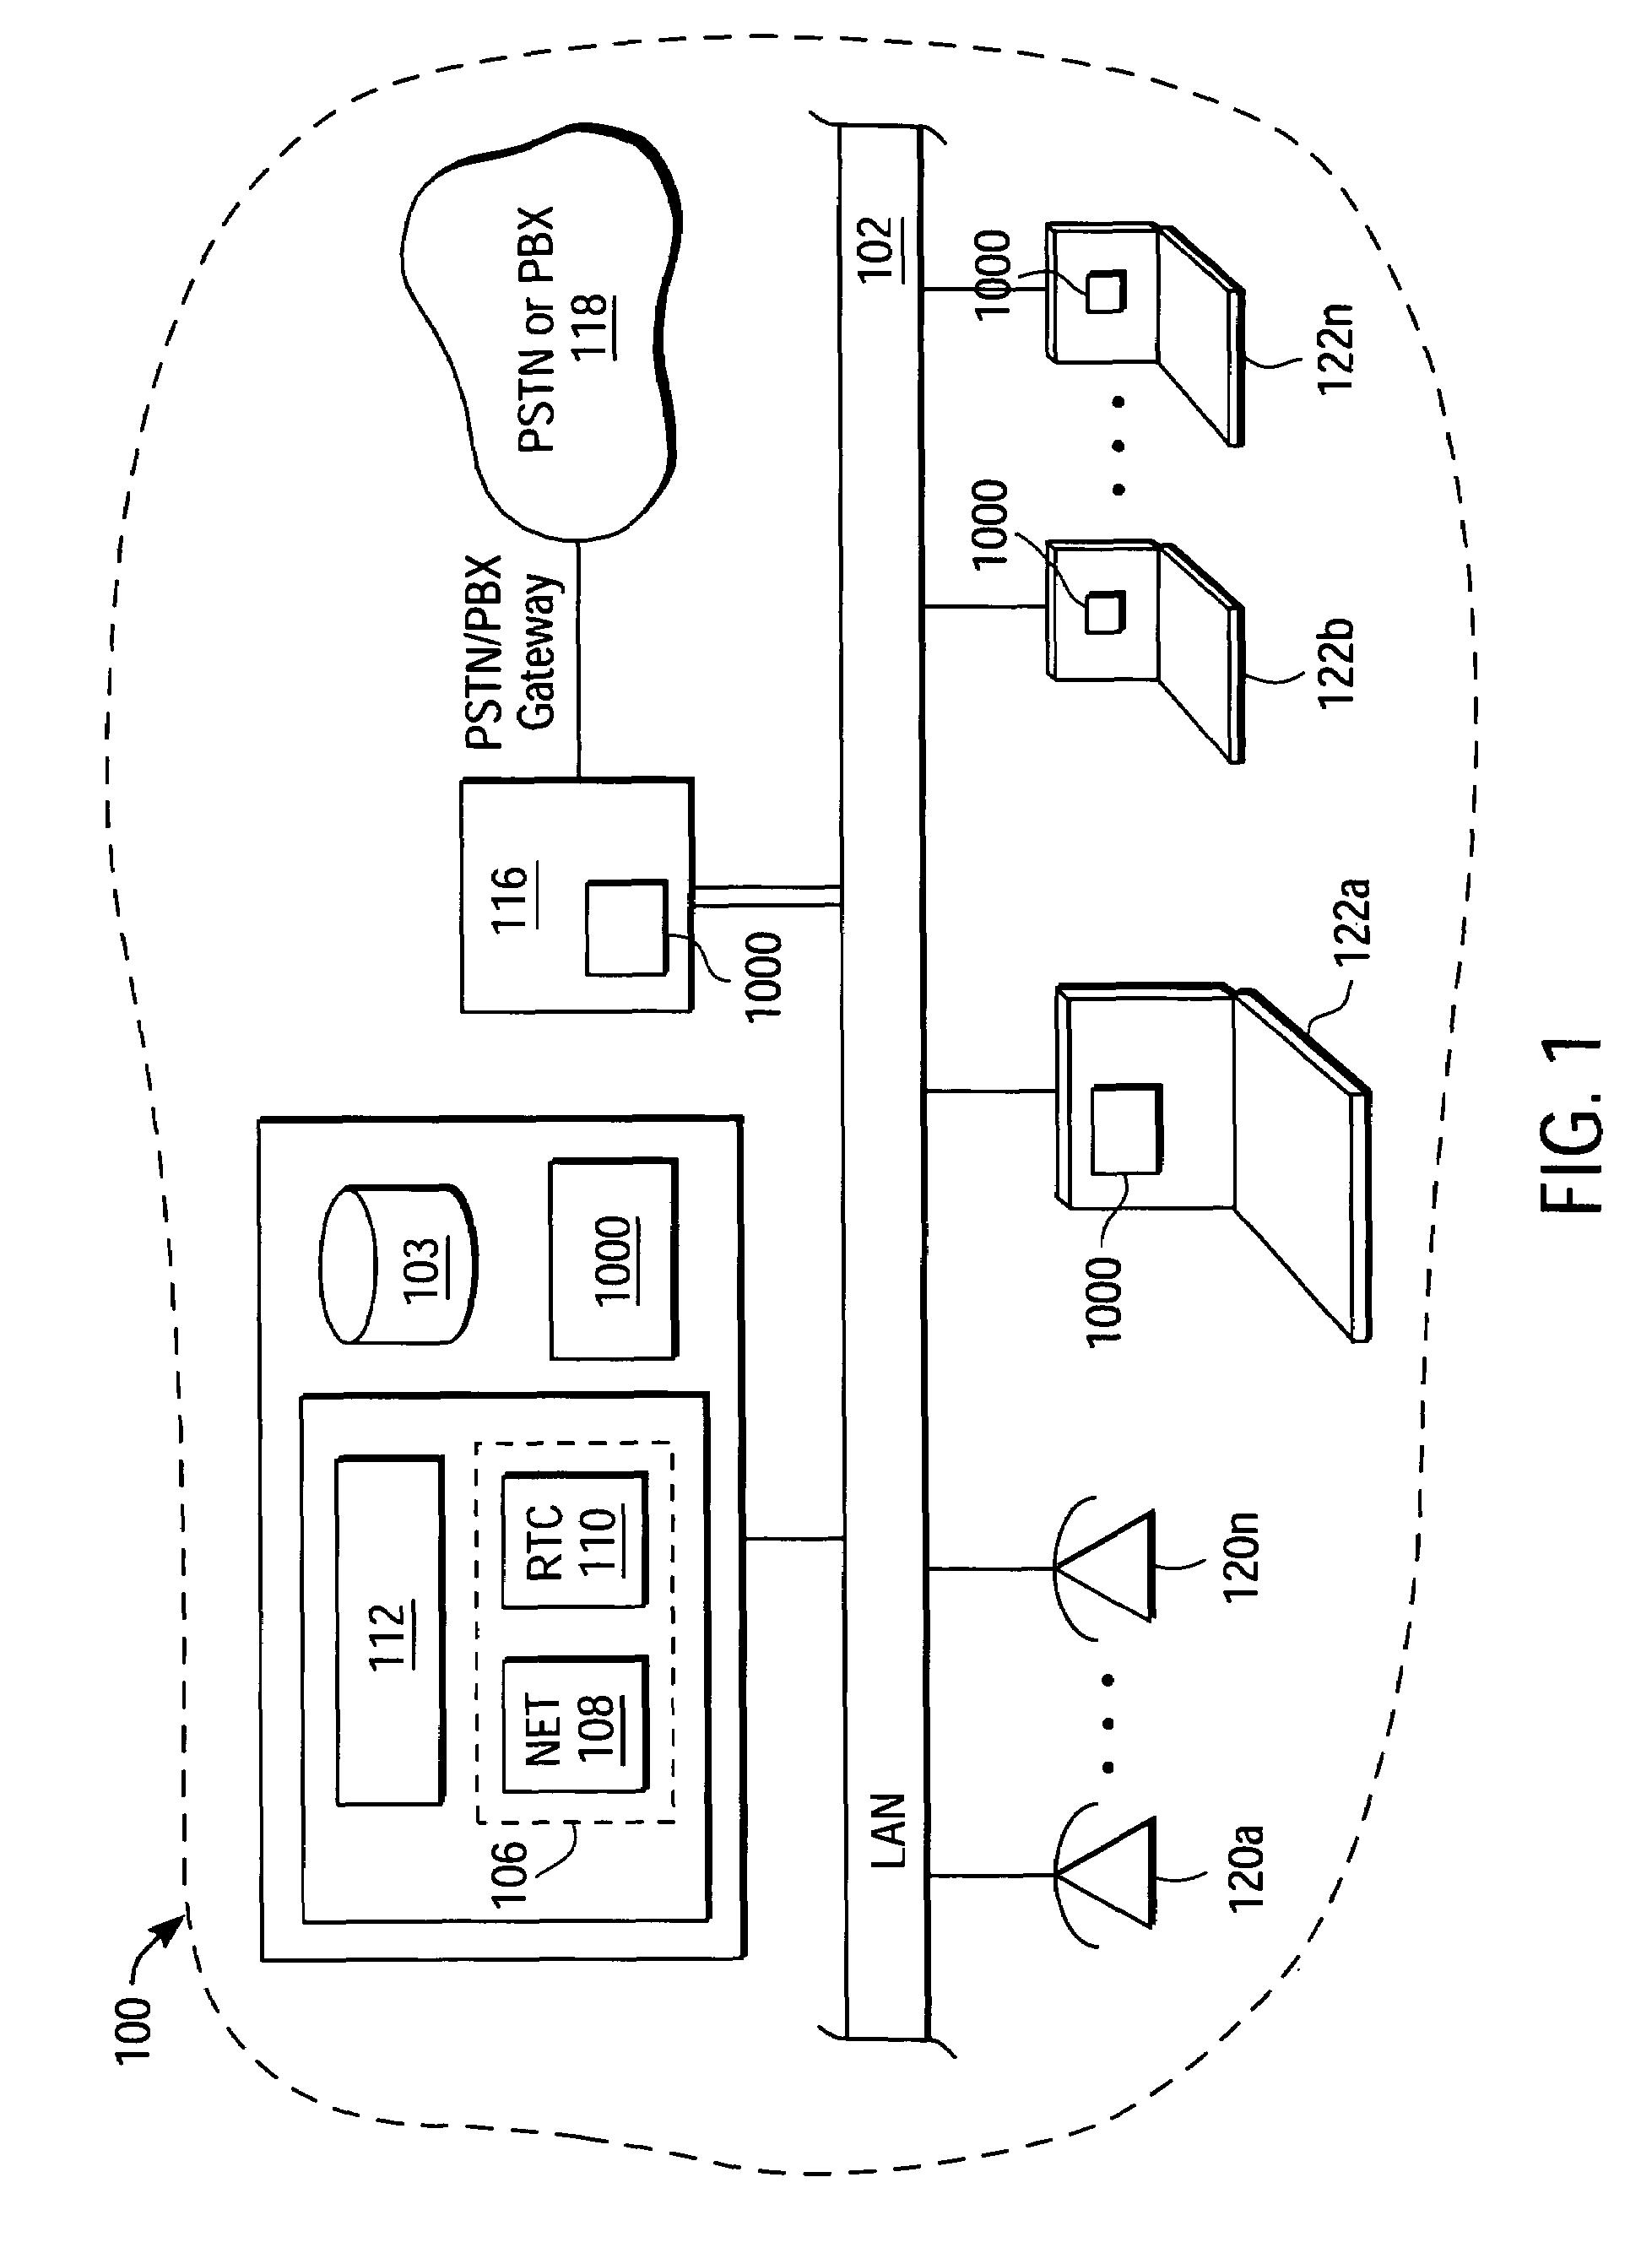 System and method for distributed modeling of real time systems